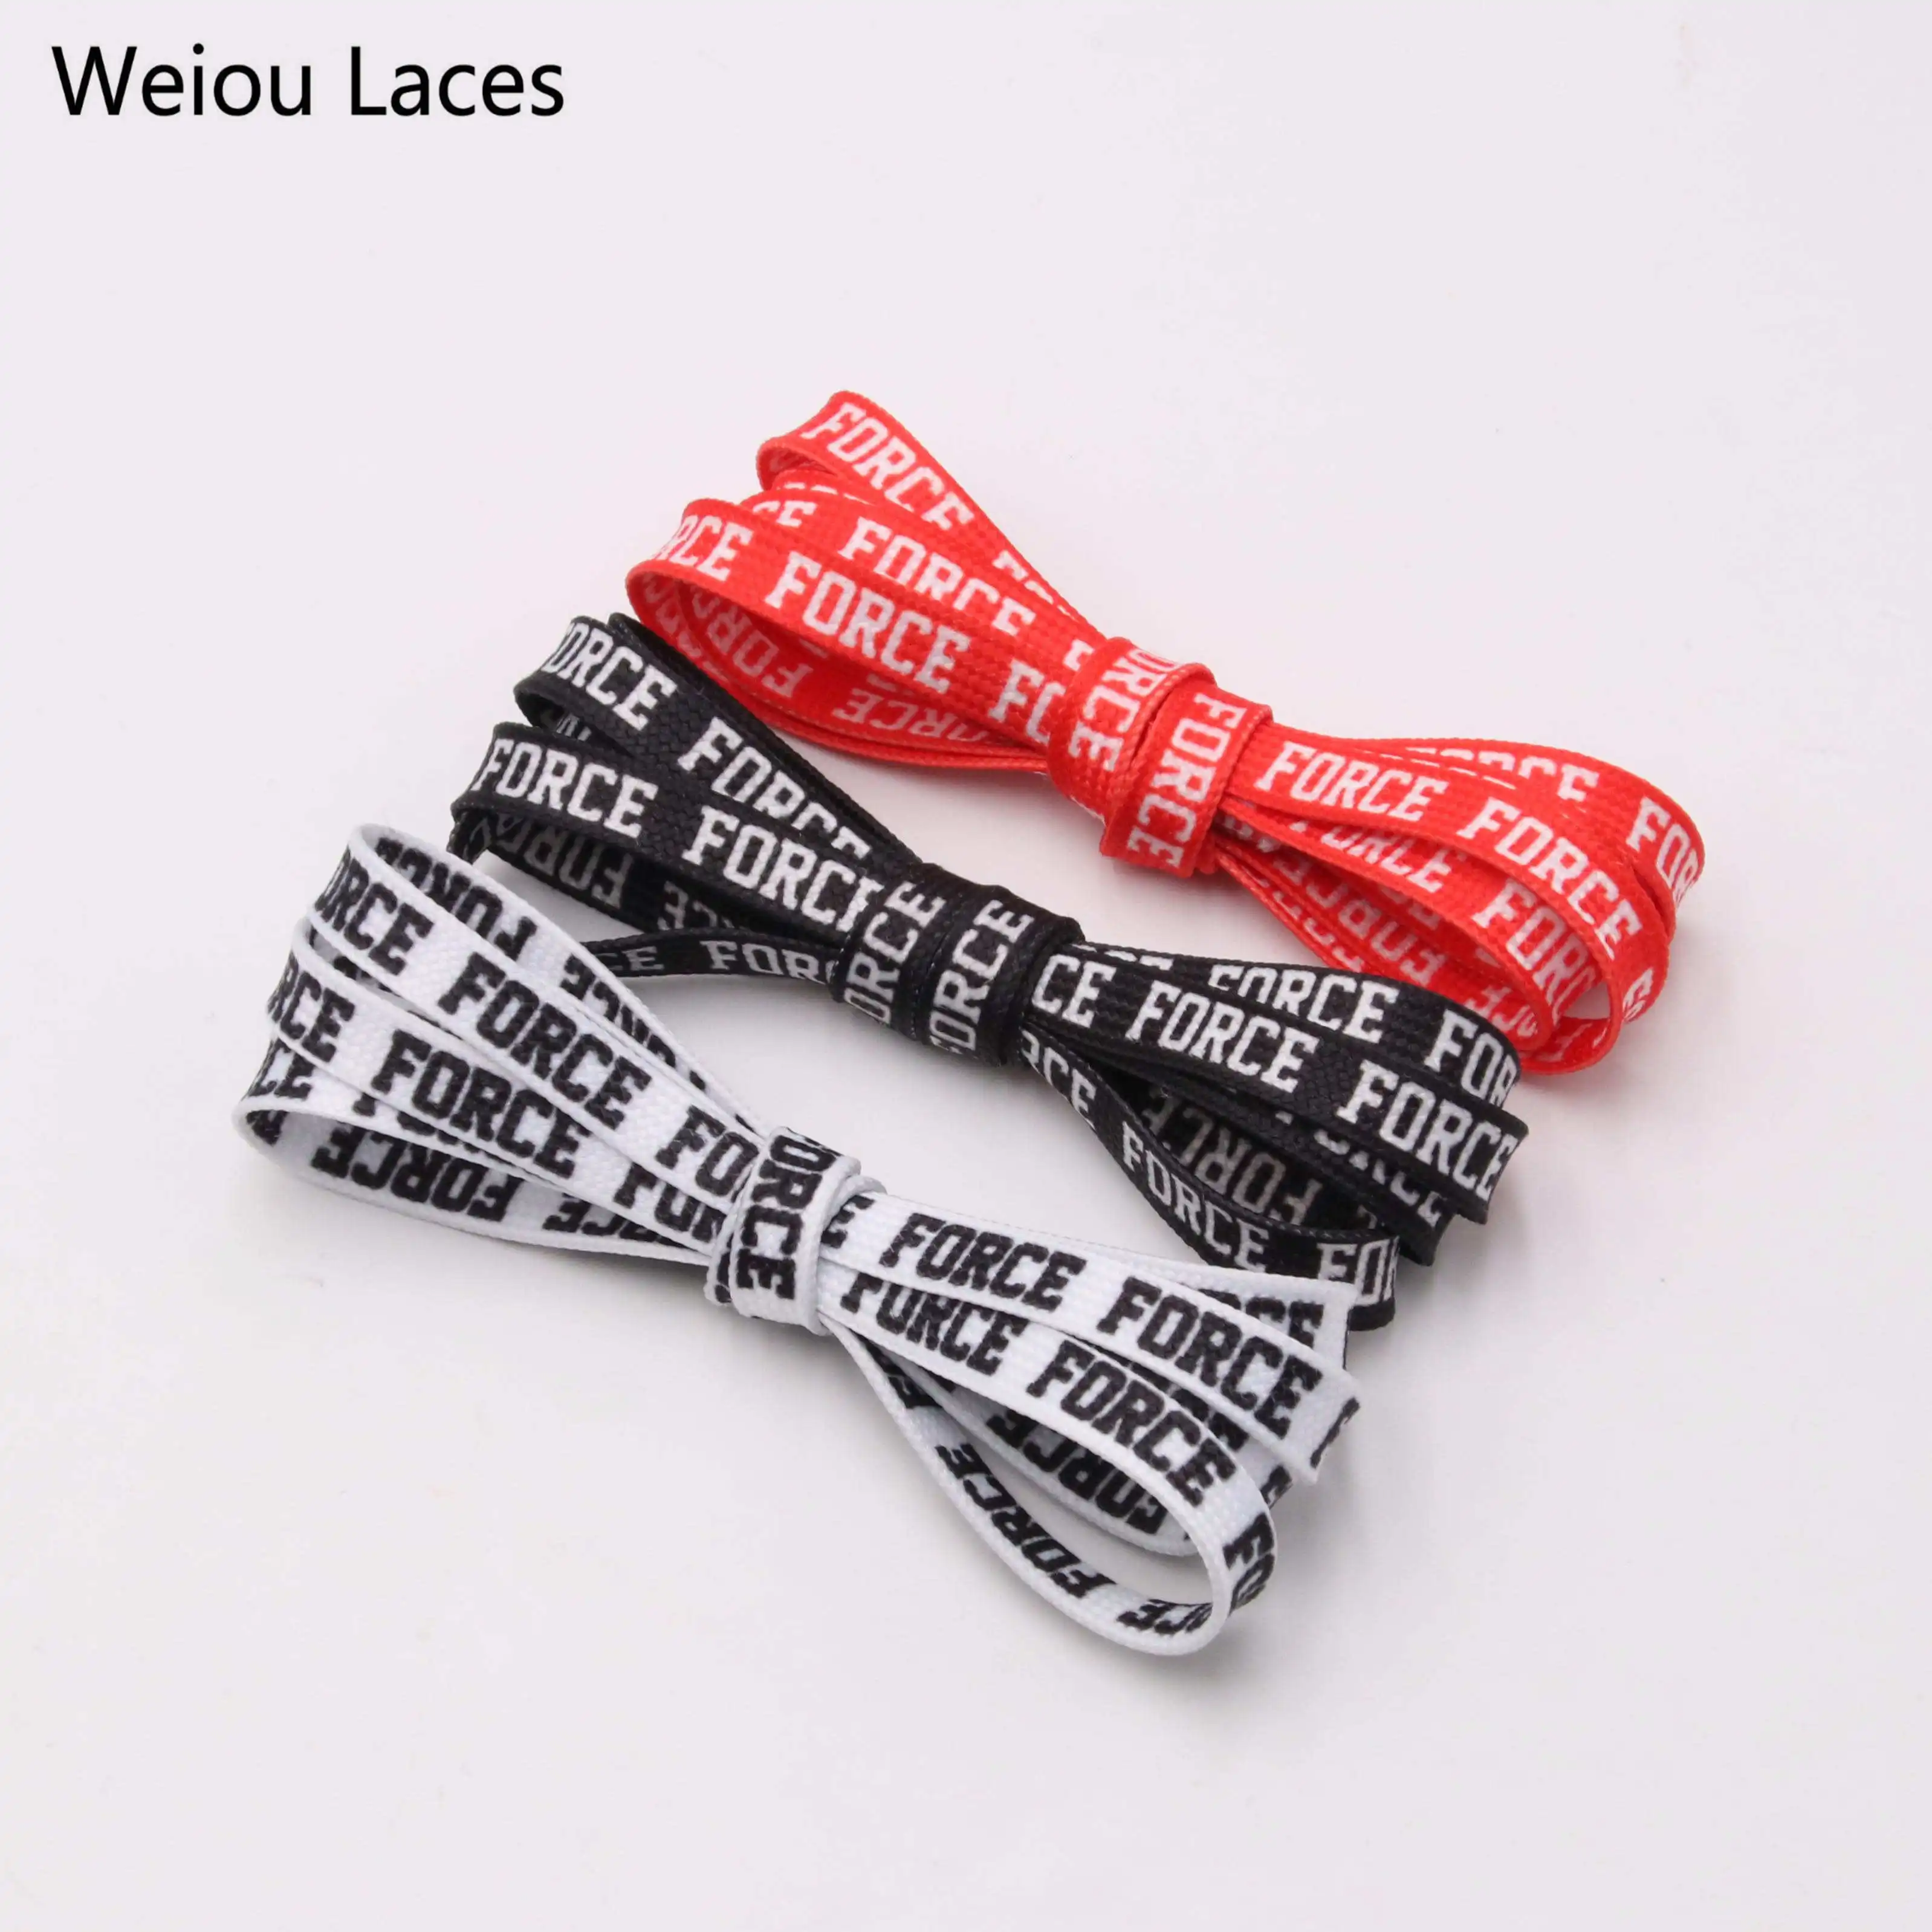 

Weiou New Fantastic Printing Shoelace With Letter Force Sneaker Sports Shoe Laces 7mm Width Black White Red Colored Shoestring, As picture, support custom colors